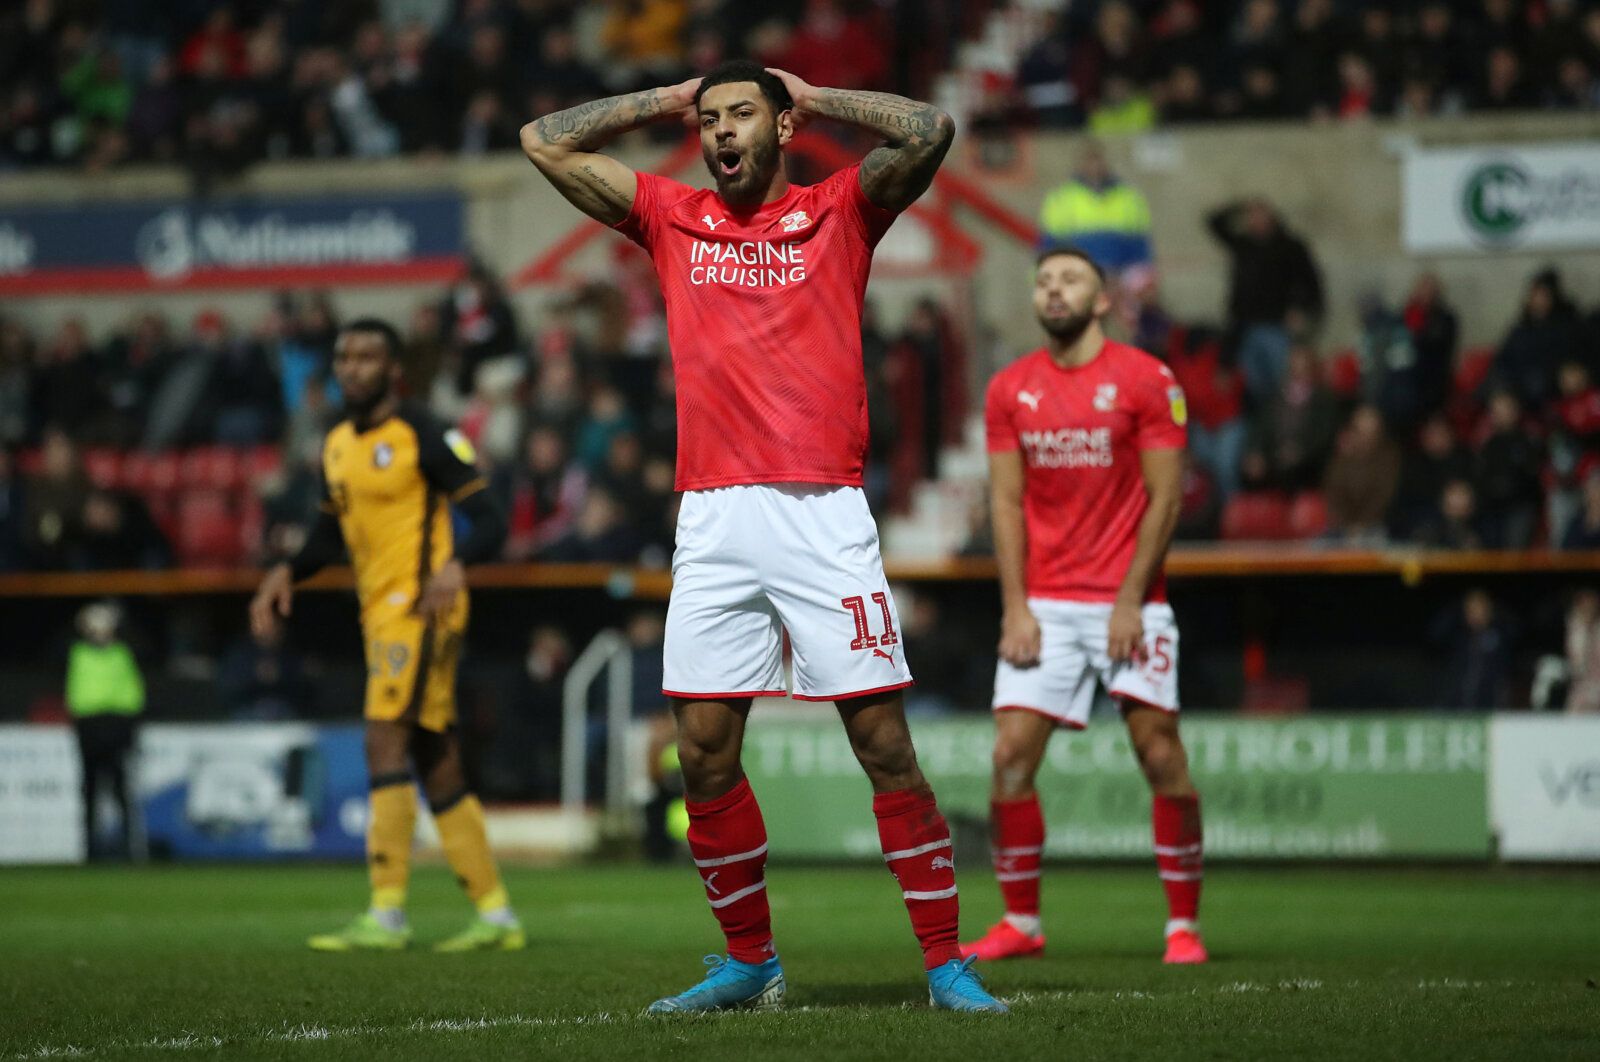 Soccer Football - League Two - Swindon Town v Port Vale - The County Ground, Swindon, Britain - January 25, 2020   Swindon Town's Kaiyne Woolery reacts   Action Images/John Clifton    EDITORIAL USE ONLY. No use with unauthorized audio, video, data, fixture lists, club/league logos or 